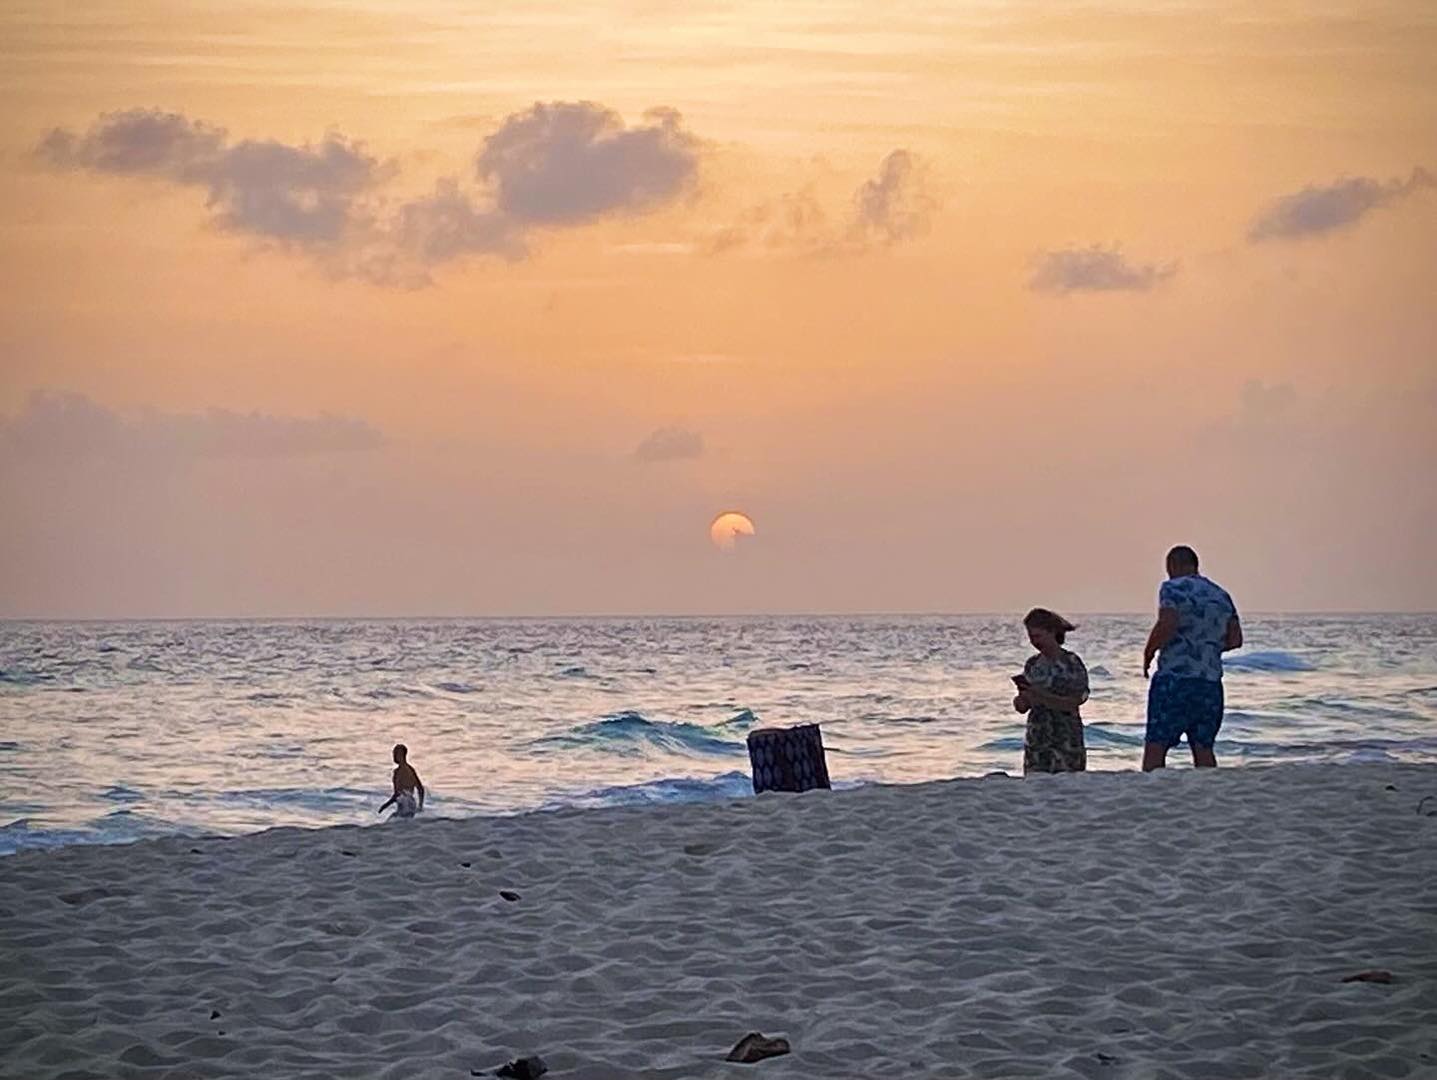 We caught most of the sunsets off of southern Barbados throughout the trip—here is our first!